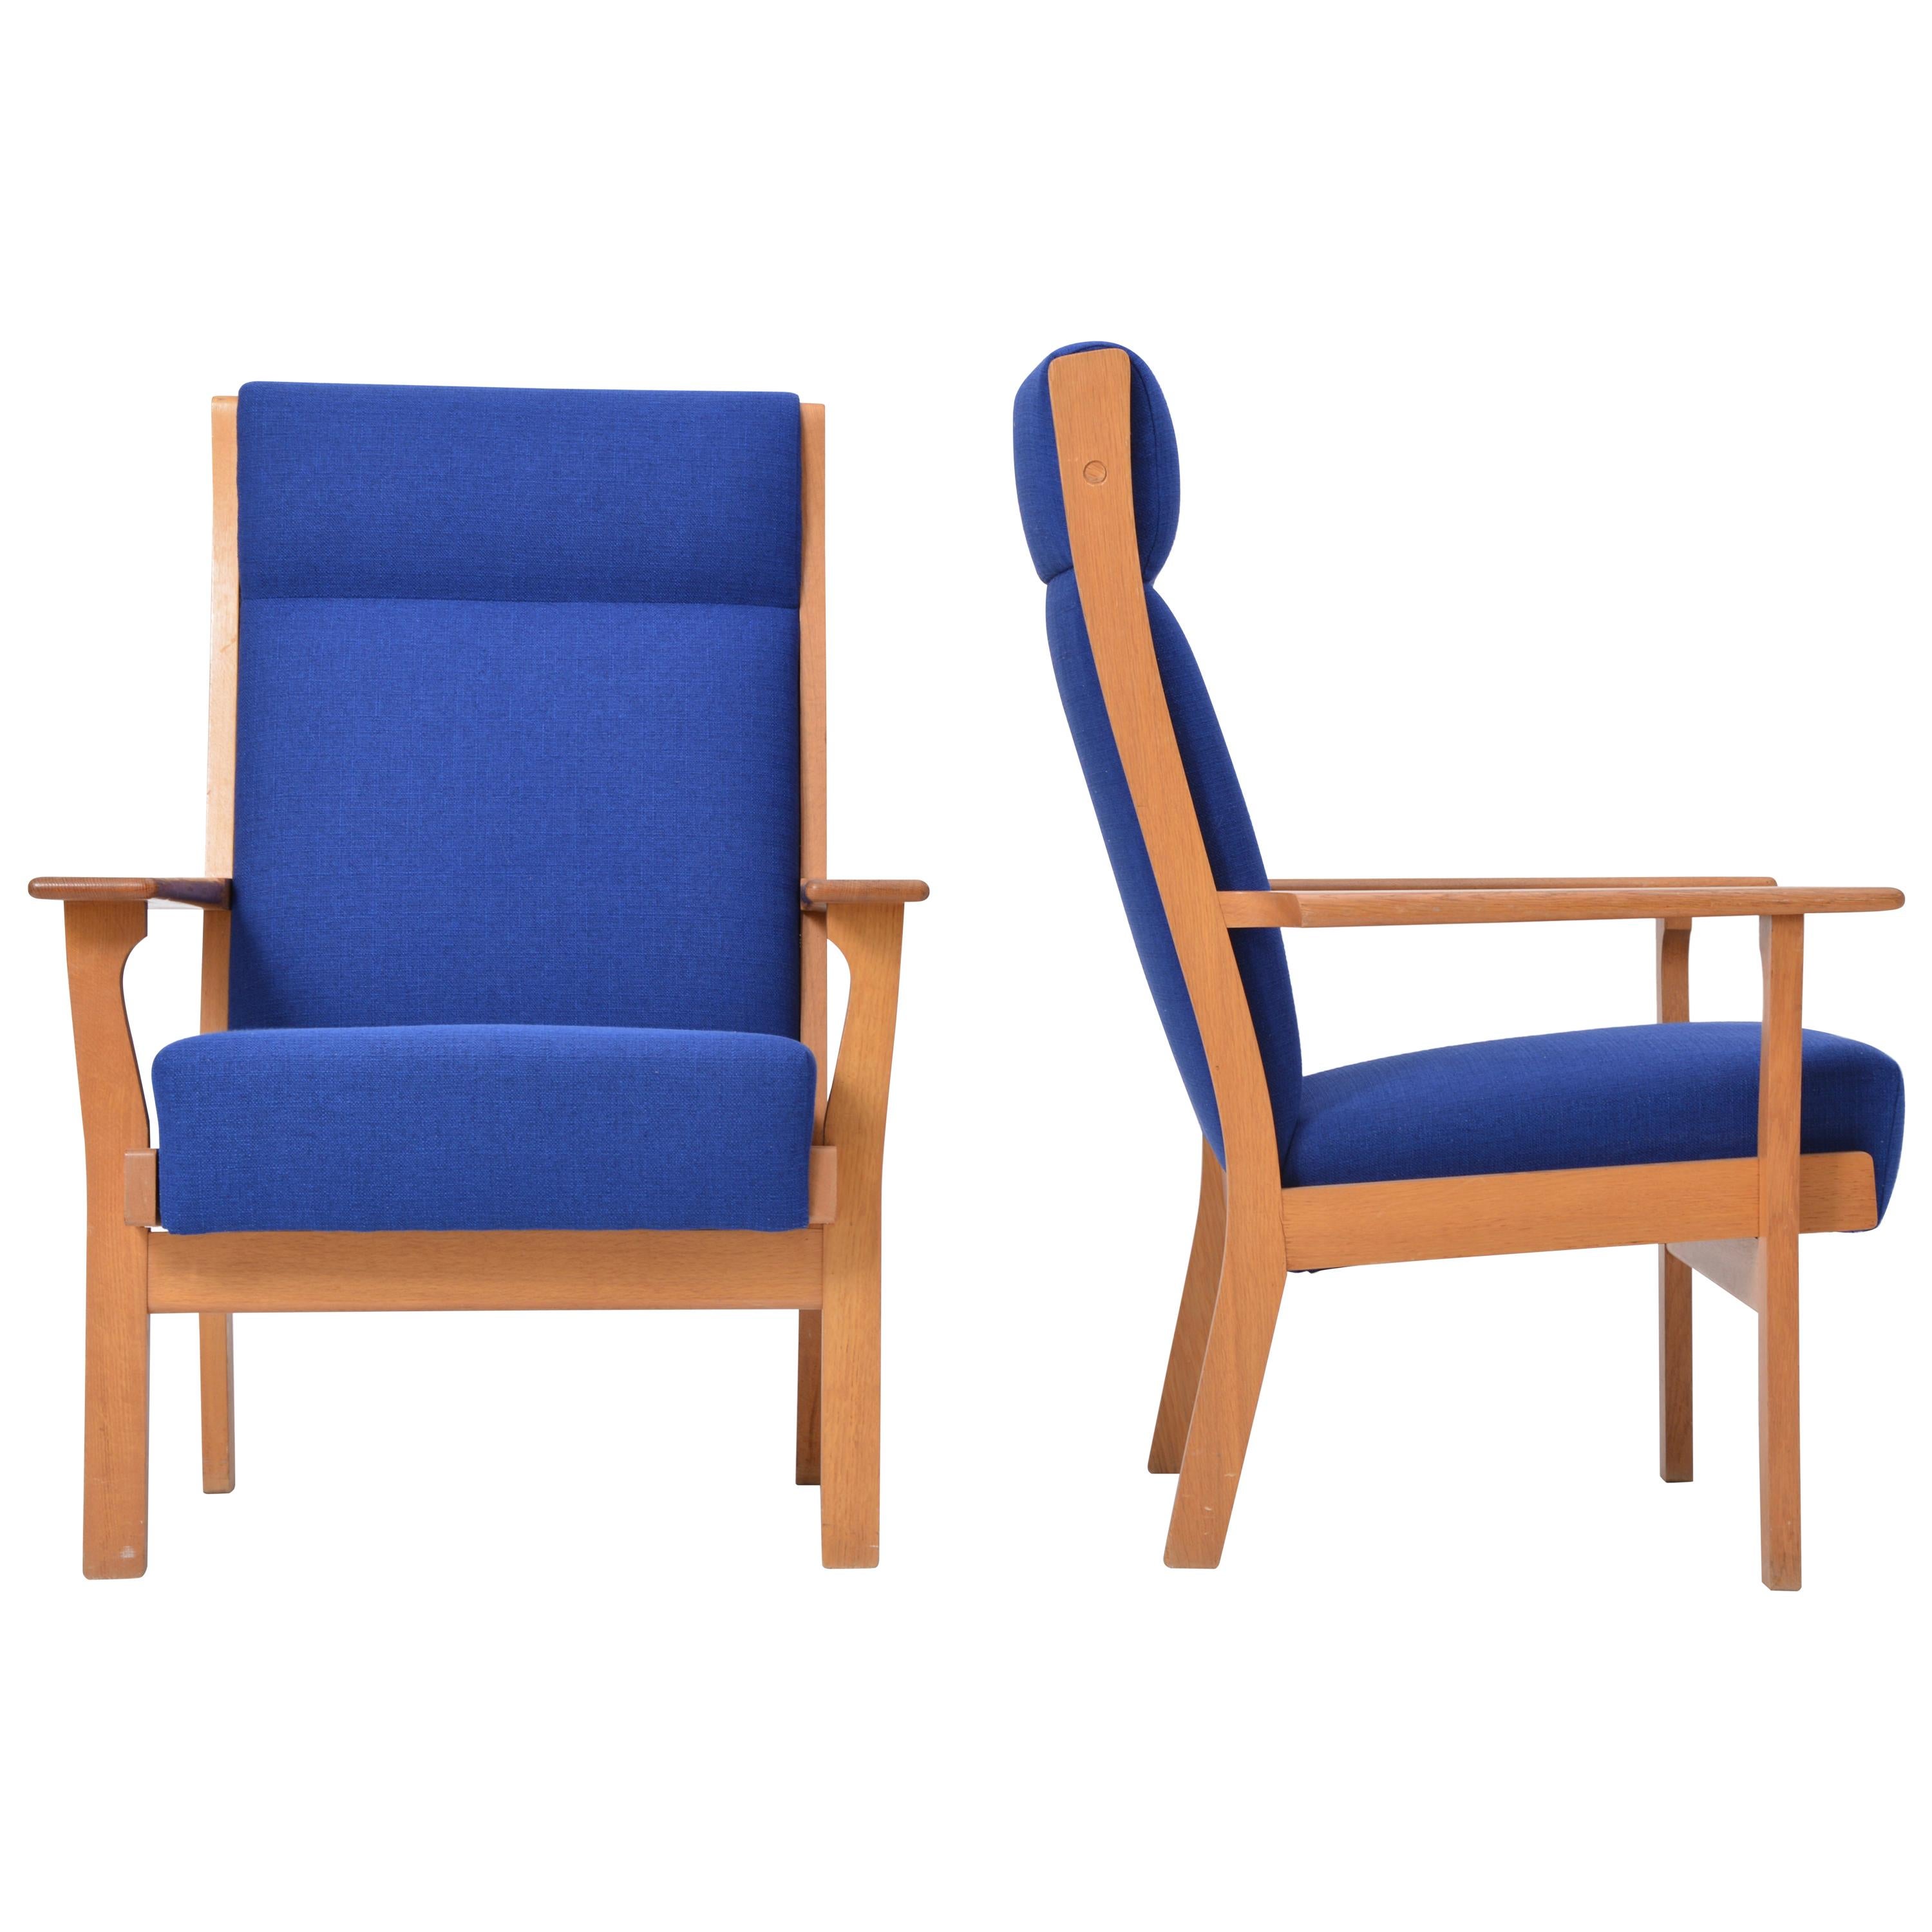 Set of Two Danish Mid-Century Modern GE 181 a Chairs by Hans Wegner for GETAMA